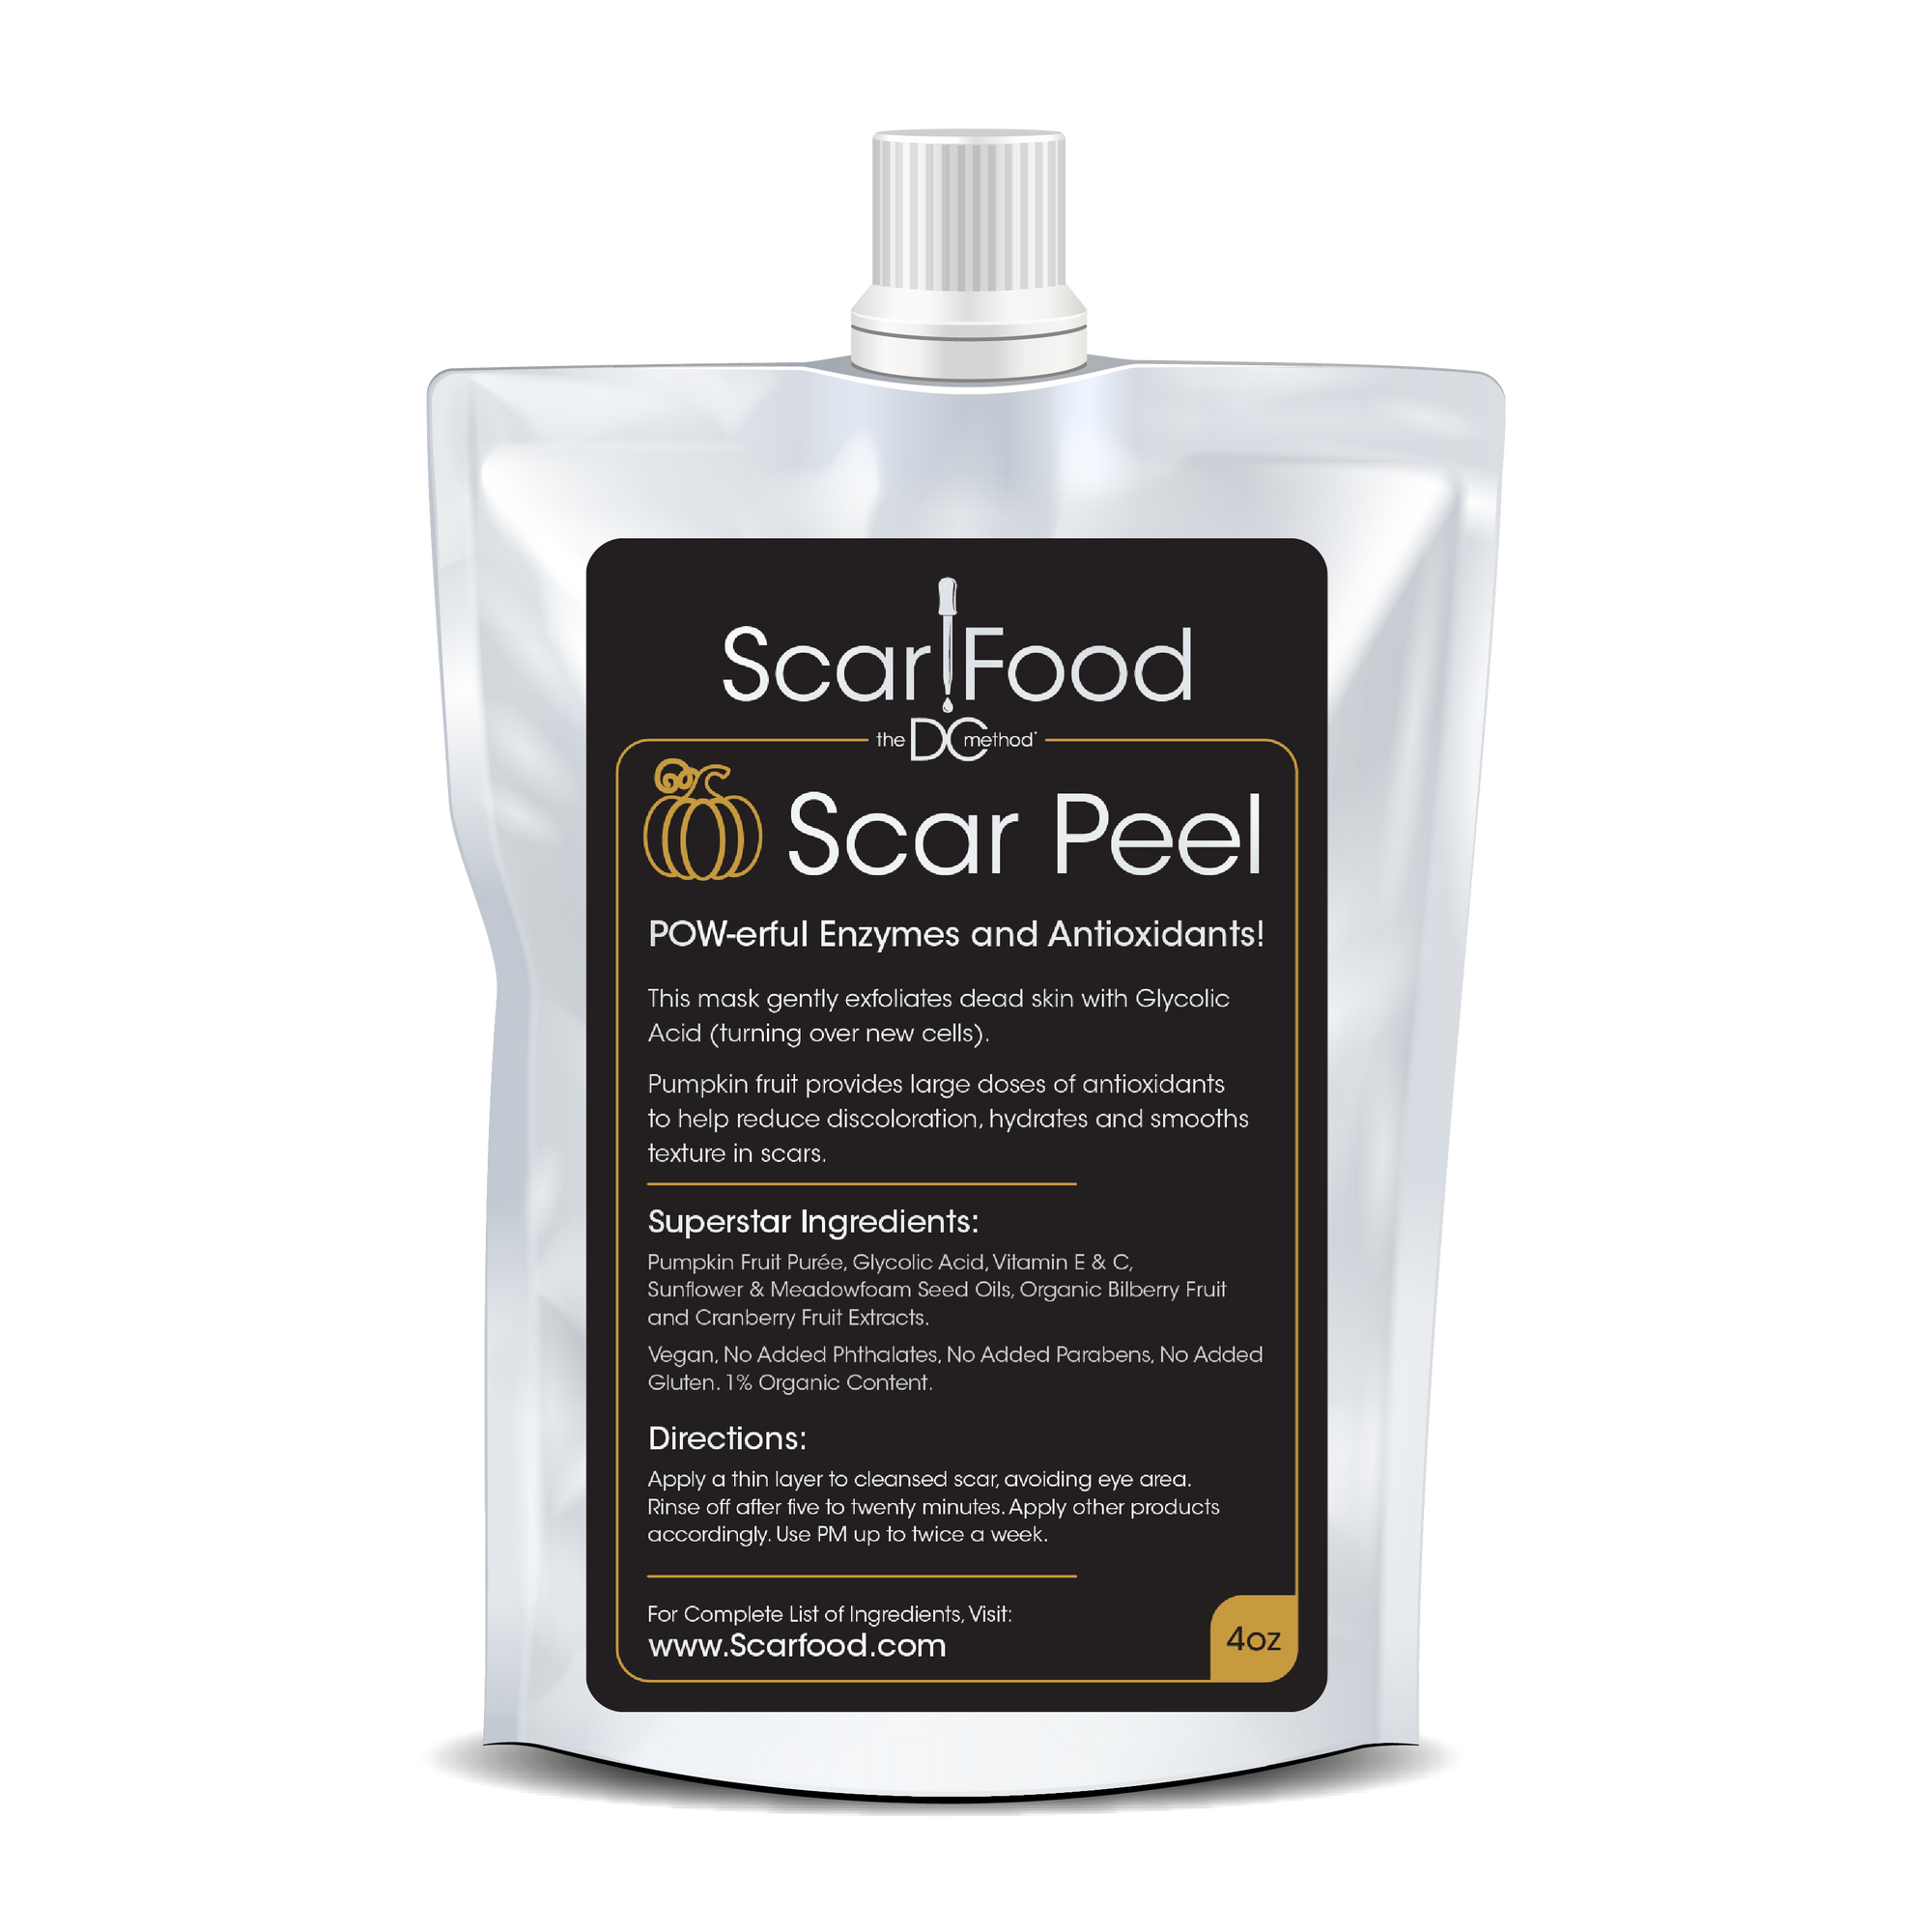 Scar Peel (Reduce Discoloration and Smooth Texture)